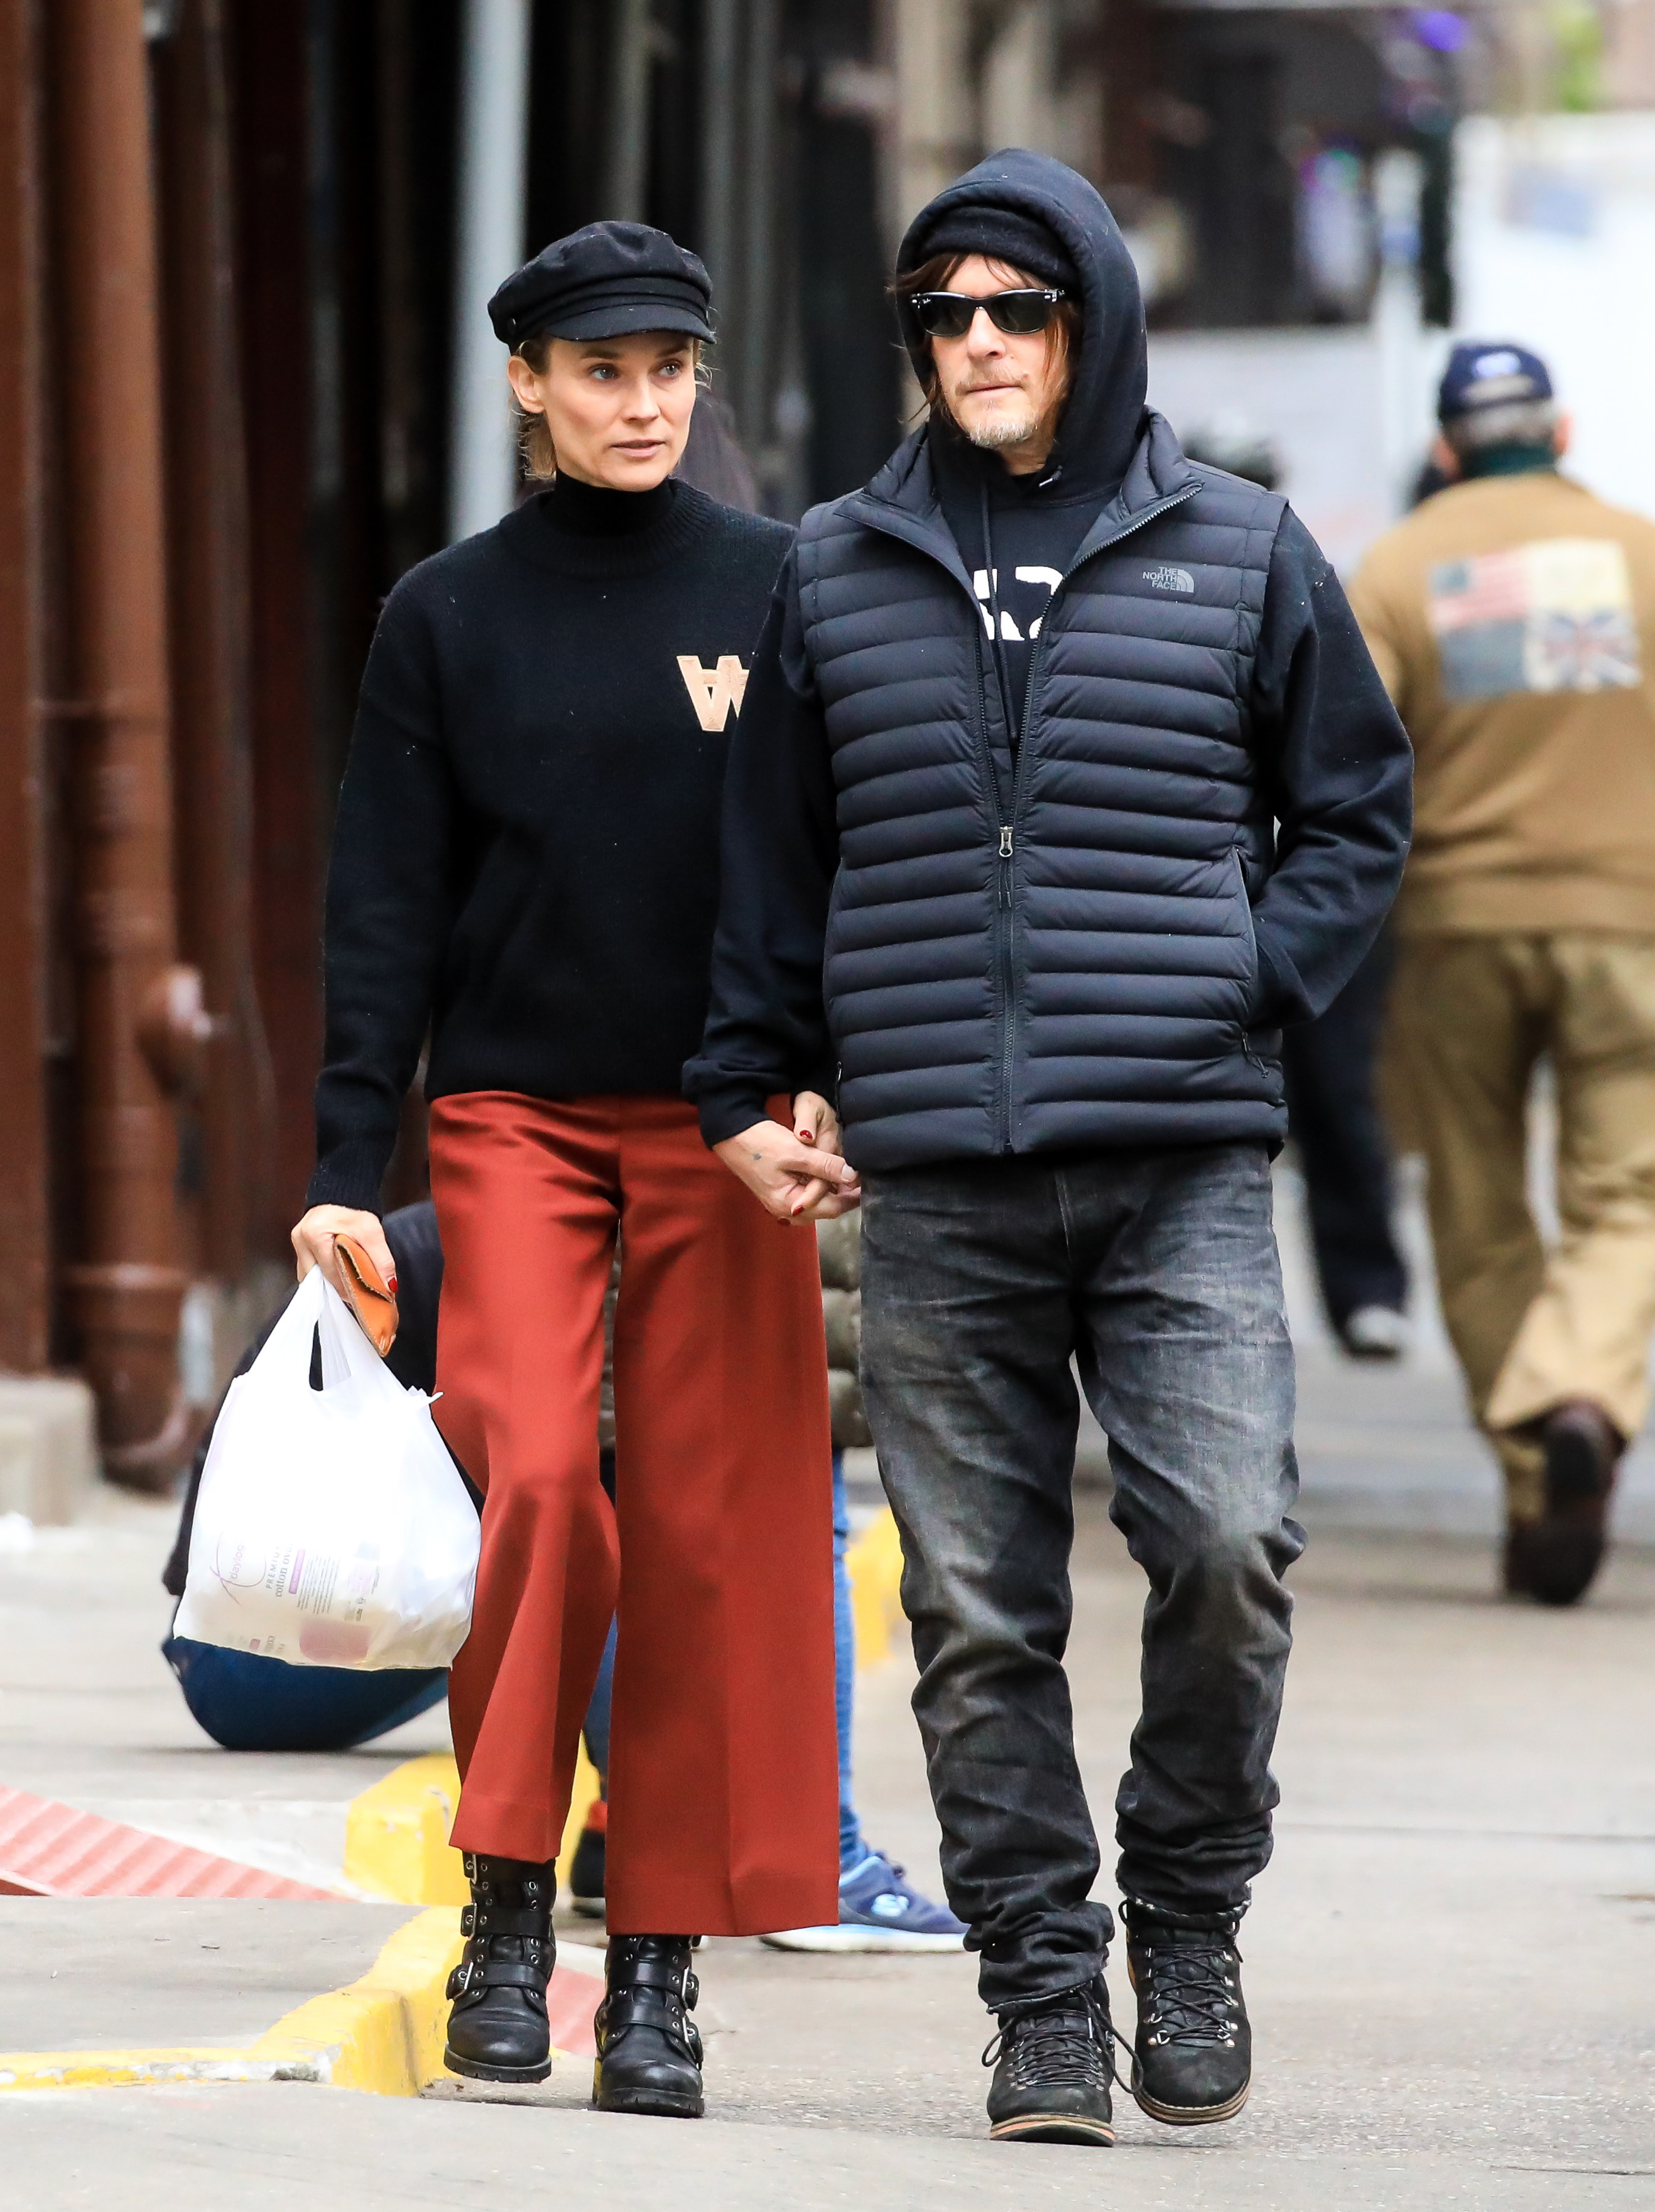 Kruger and Reedus walk down the street while Kruger holds a plastic bag in her hand